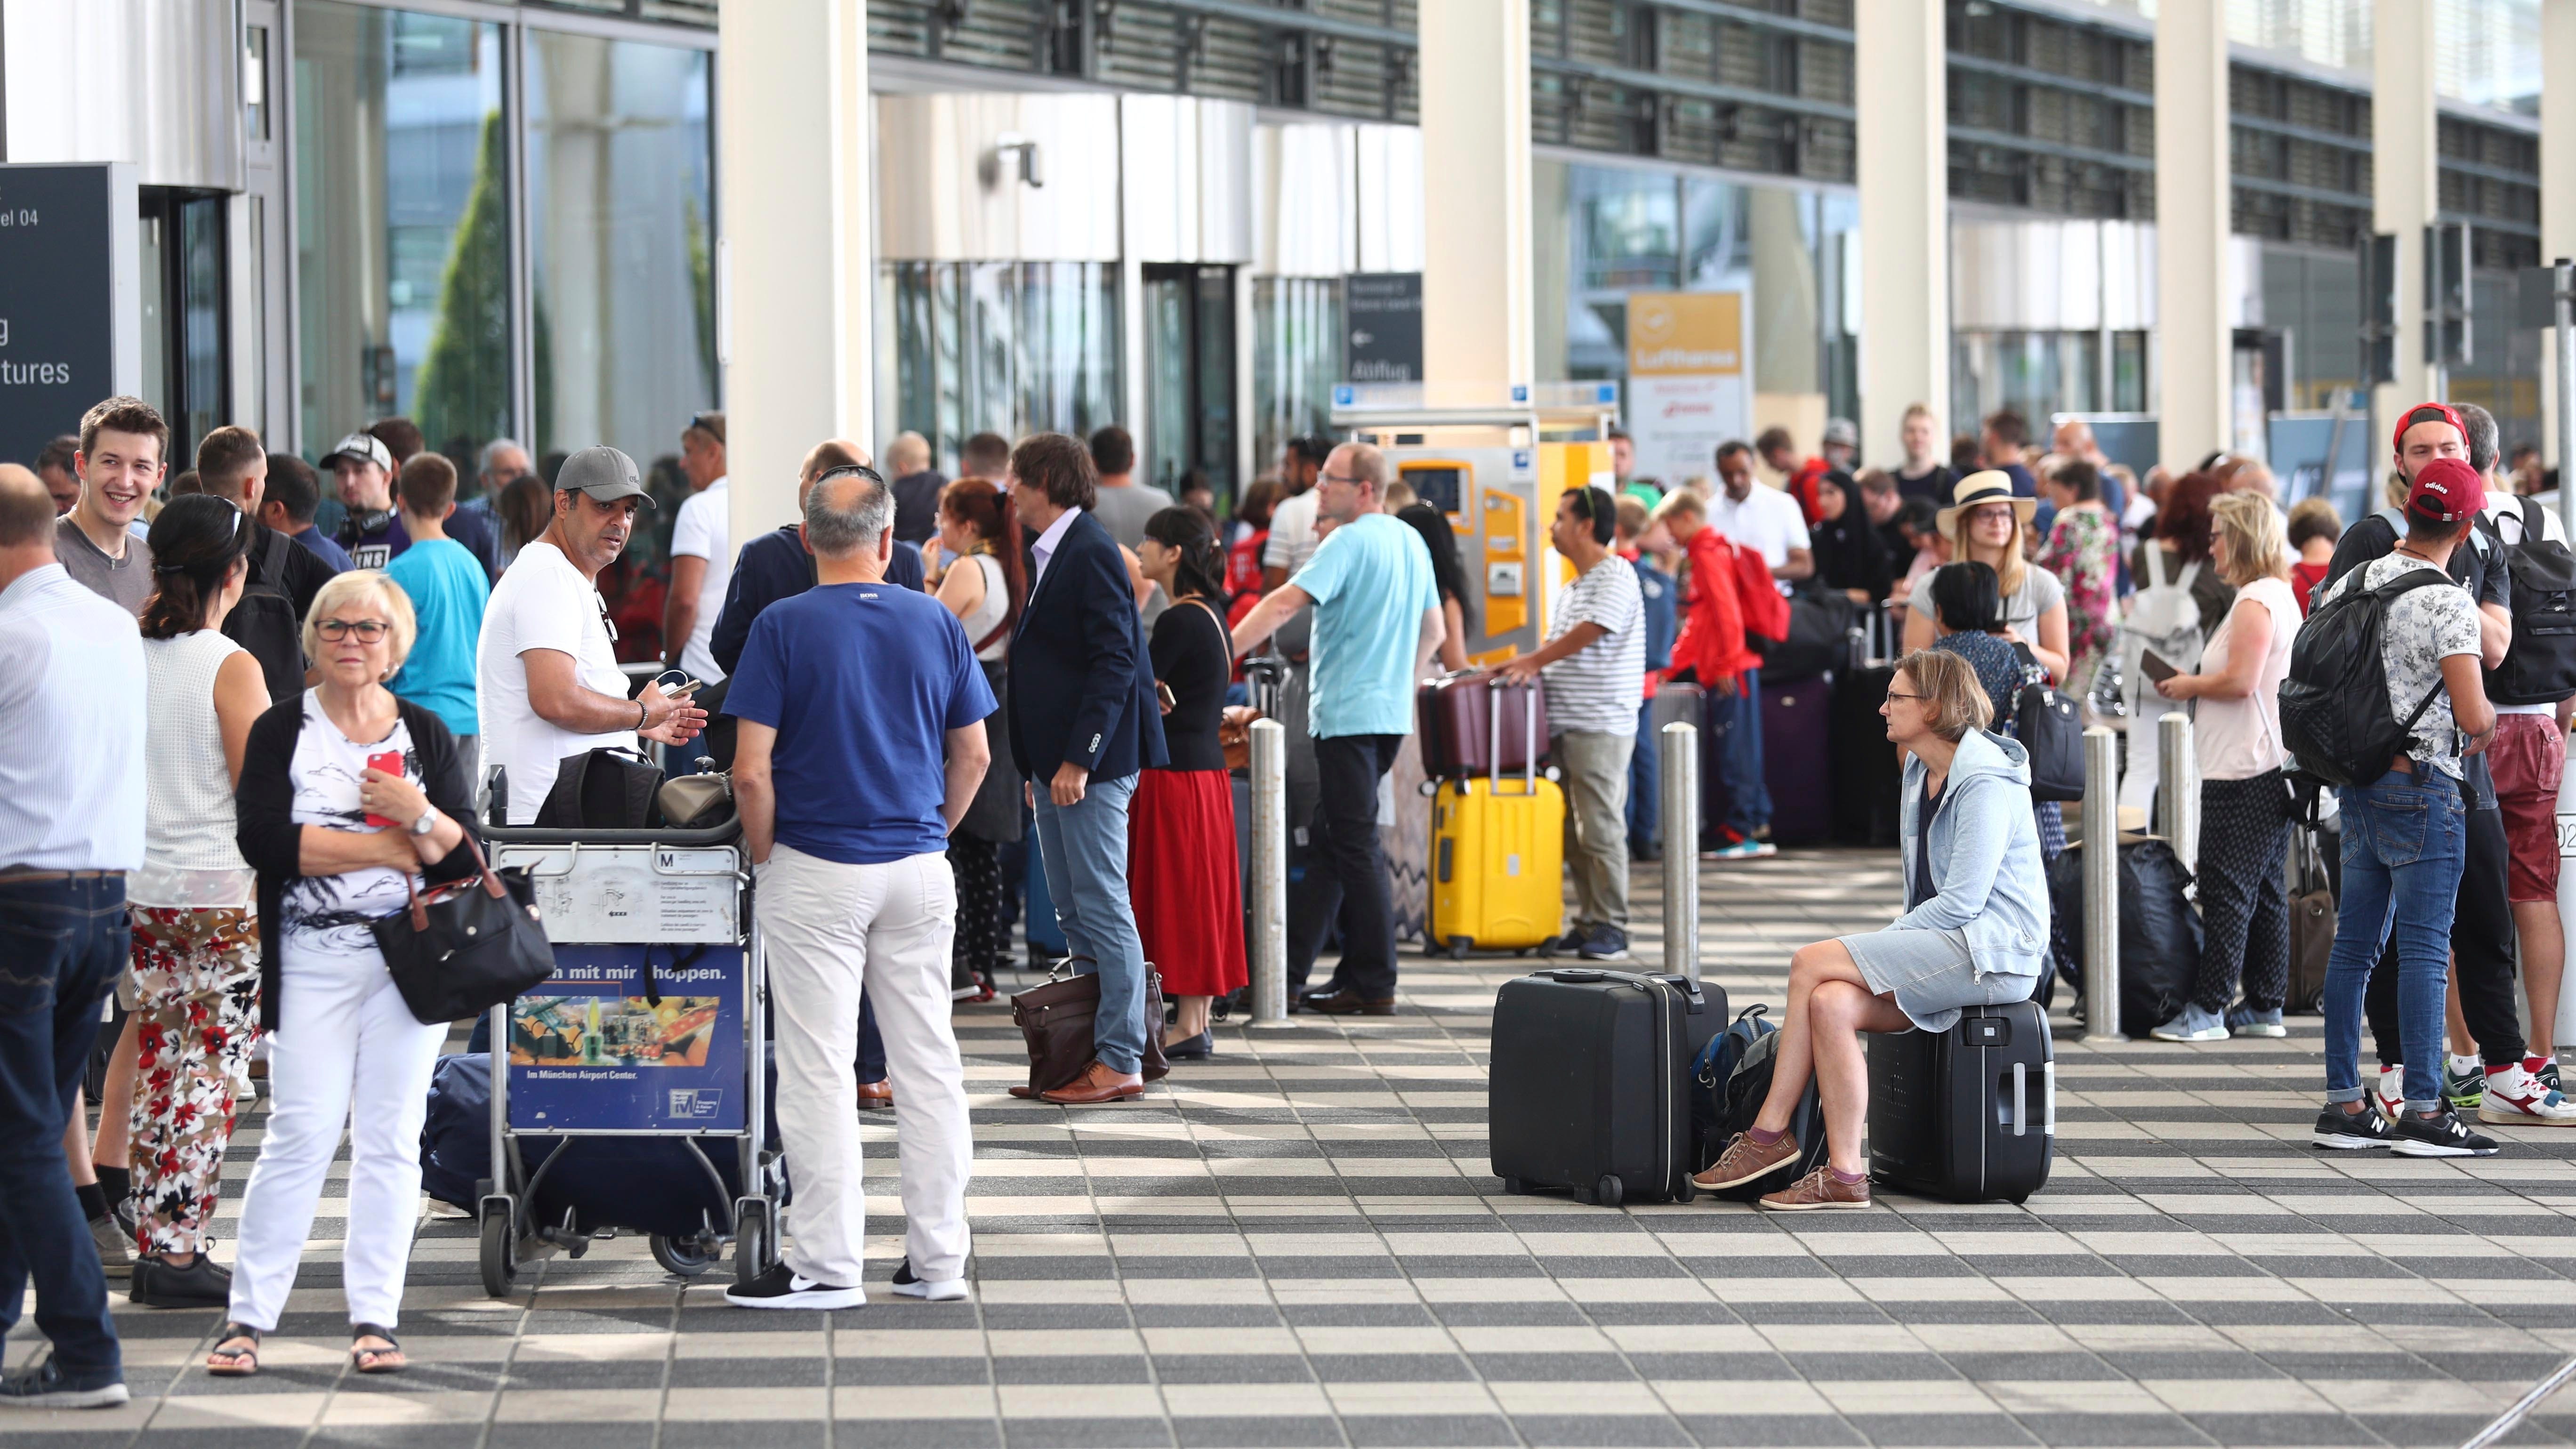 Munich, Germany, airport passenger detained after bypassing security